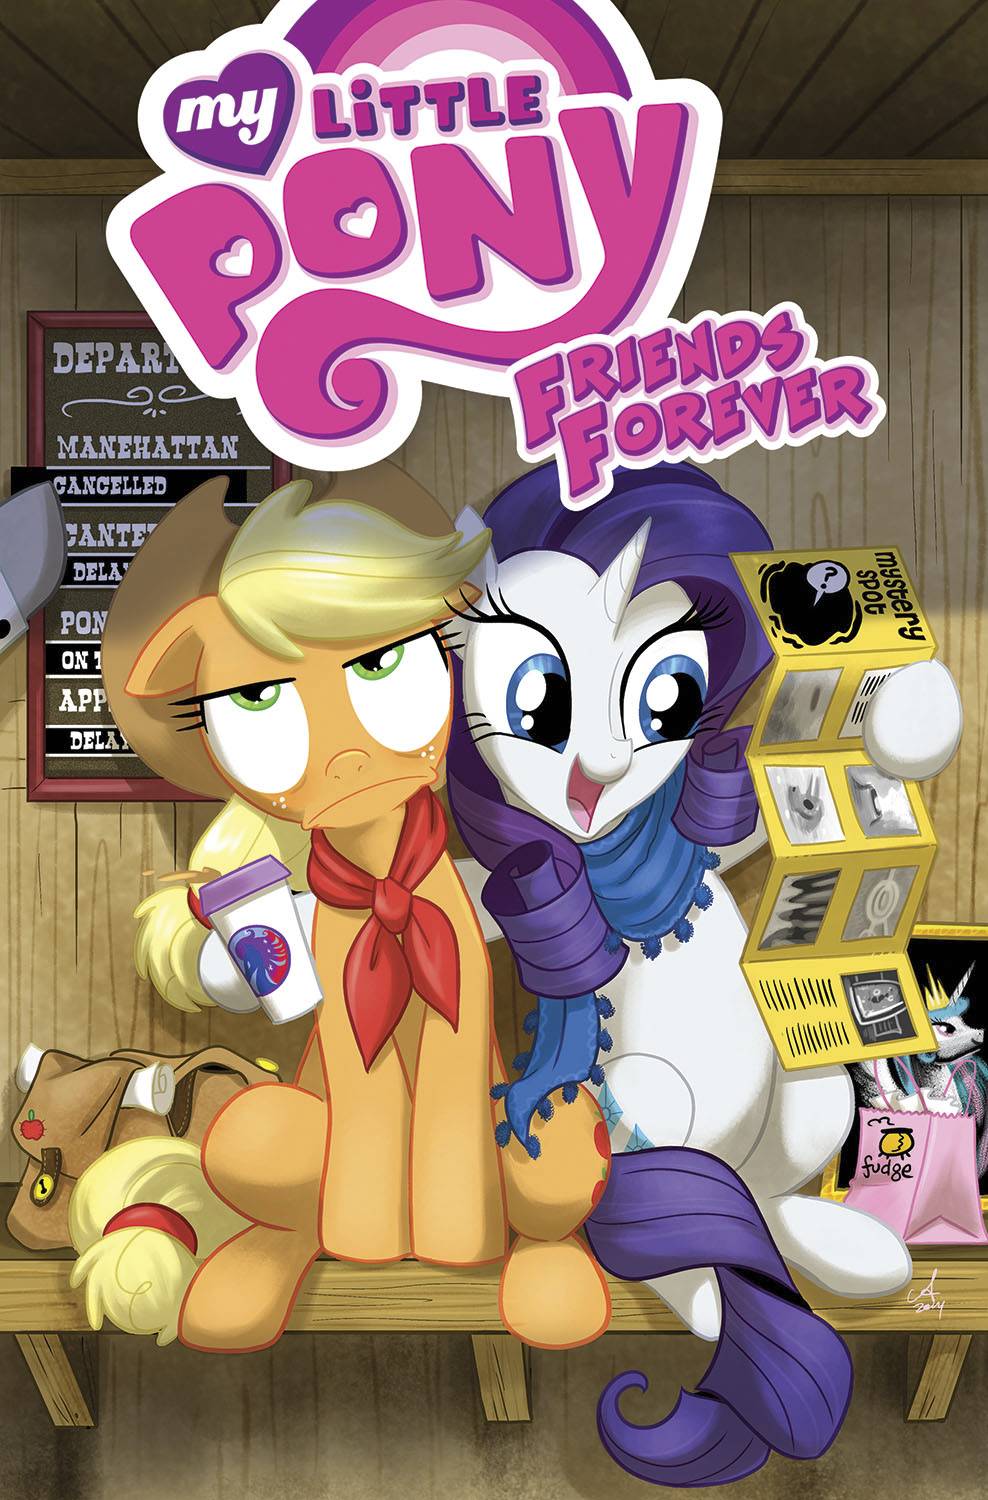 MY LITTLE PONY: FRIENDS FOREVER VOL 02